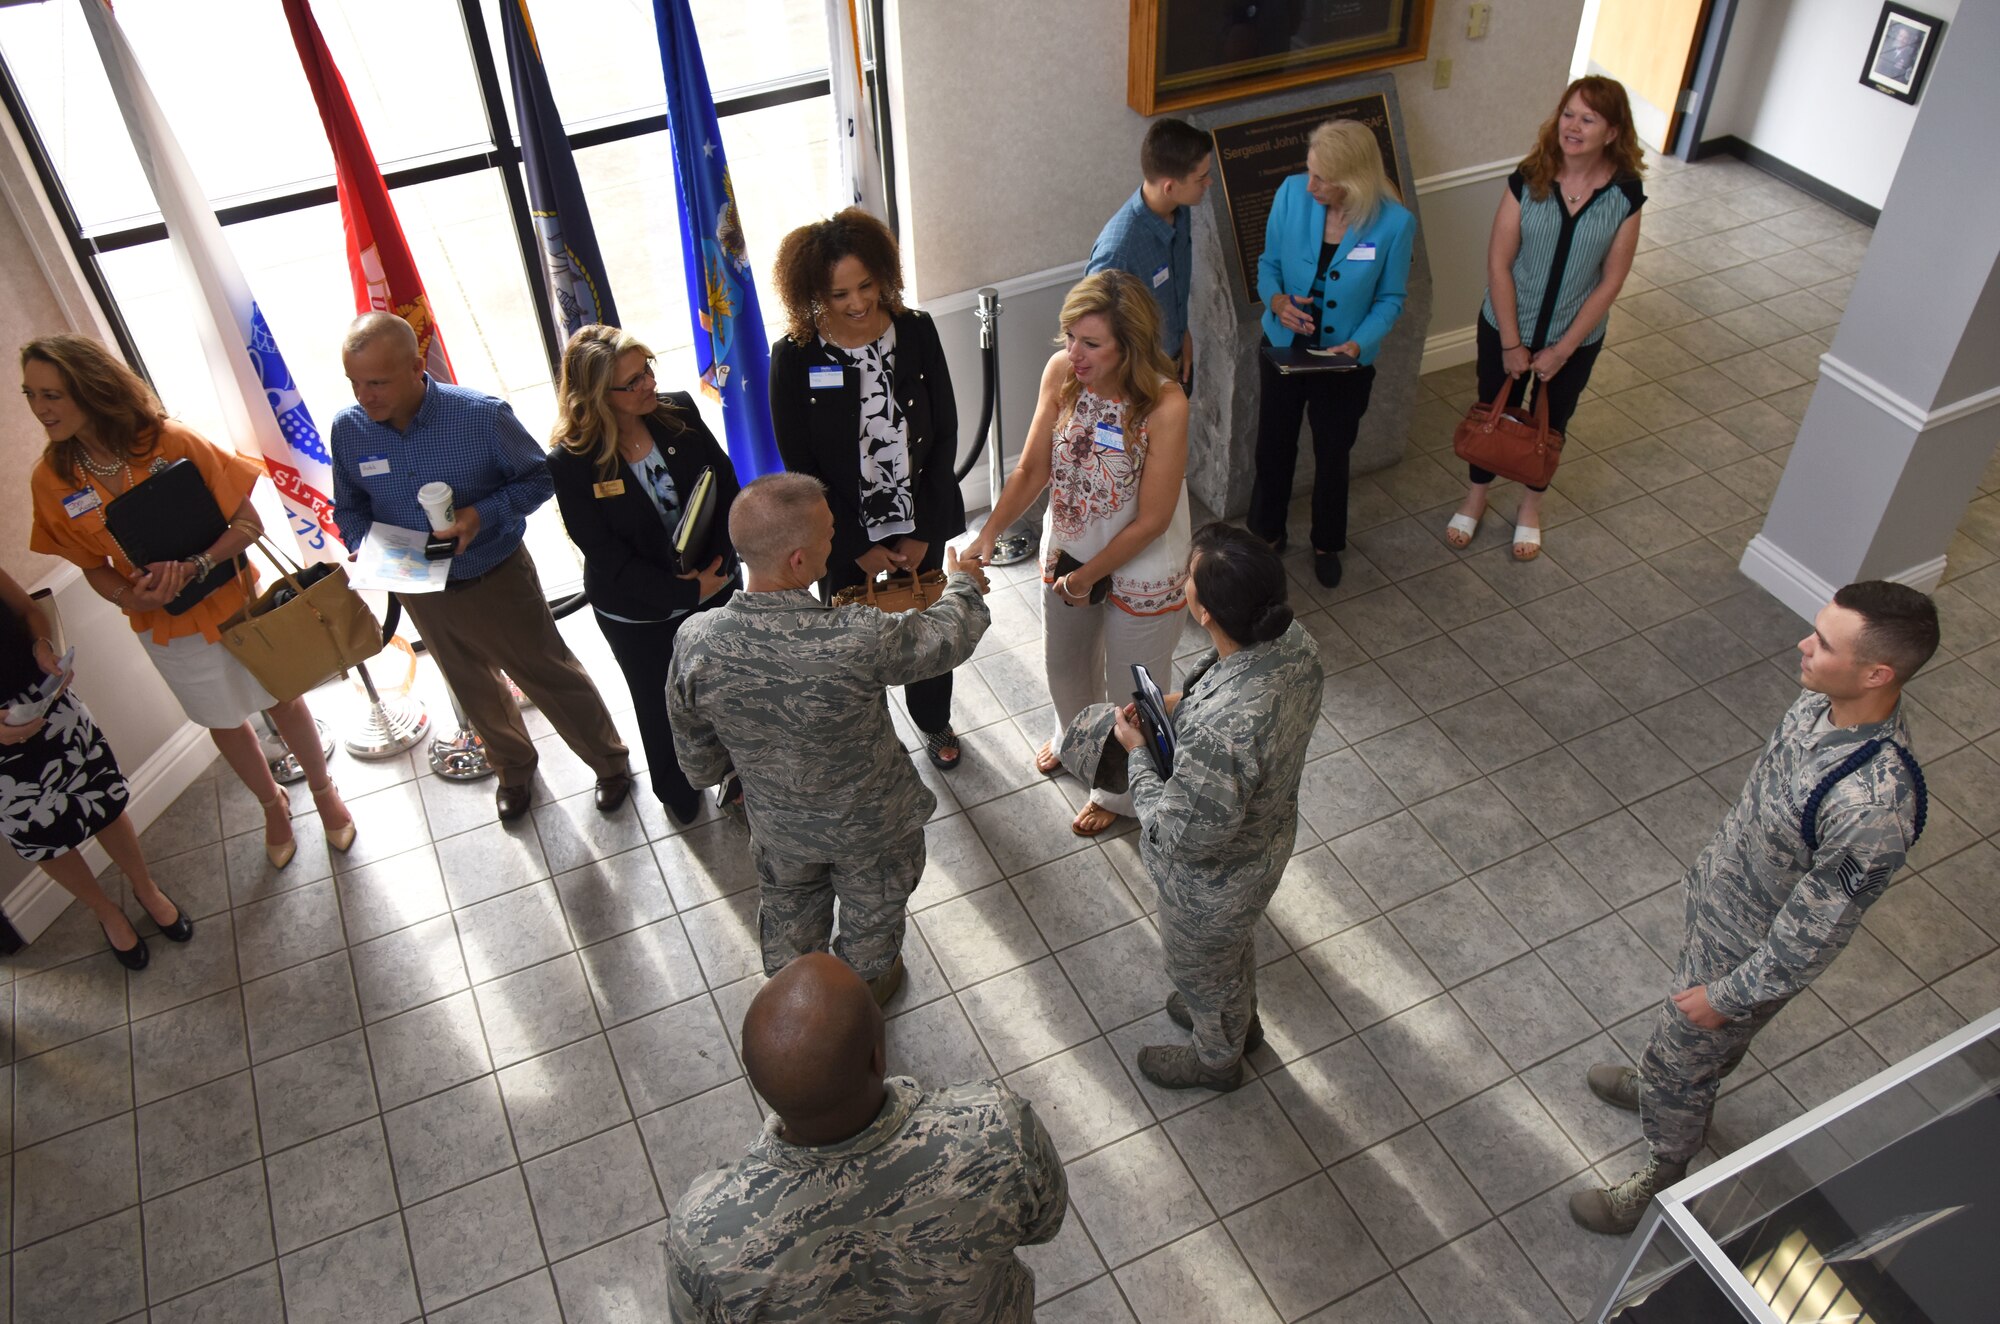 U.S. Air Force Lt. Gen. Steven Kwast, Air Education and Training Command commander, is greeted by Keesler leadership and their spouses at the Levitow Training Support Facility during an immersion tour at Keesler Air Force Base, Mississippi, July 16, 2018. Kwast also received an 81st Training Group briefing followed by a tour of the Keesler Medical Center to become more familiar with Keesler’s mission. (U.S. Air Force photo by Kemberly Groue)